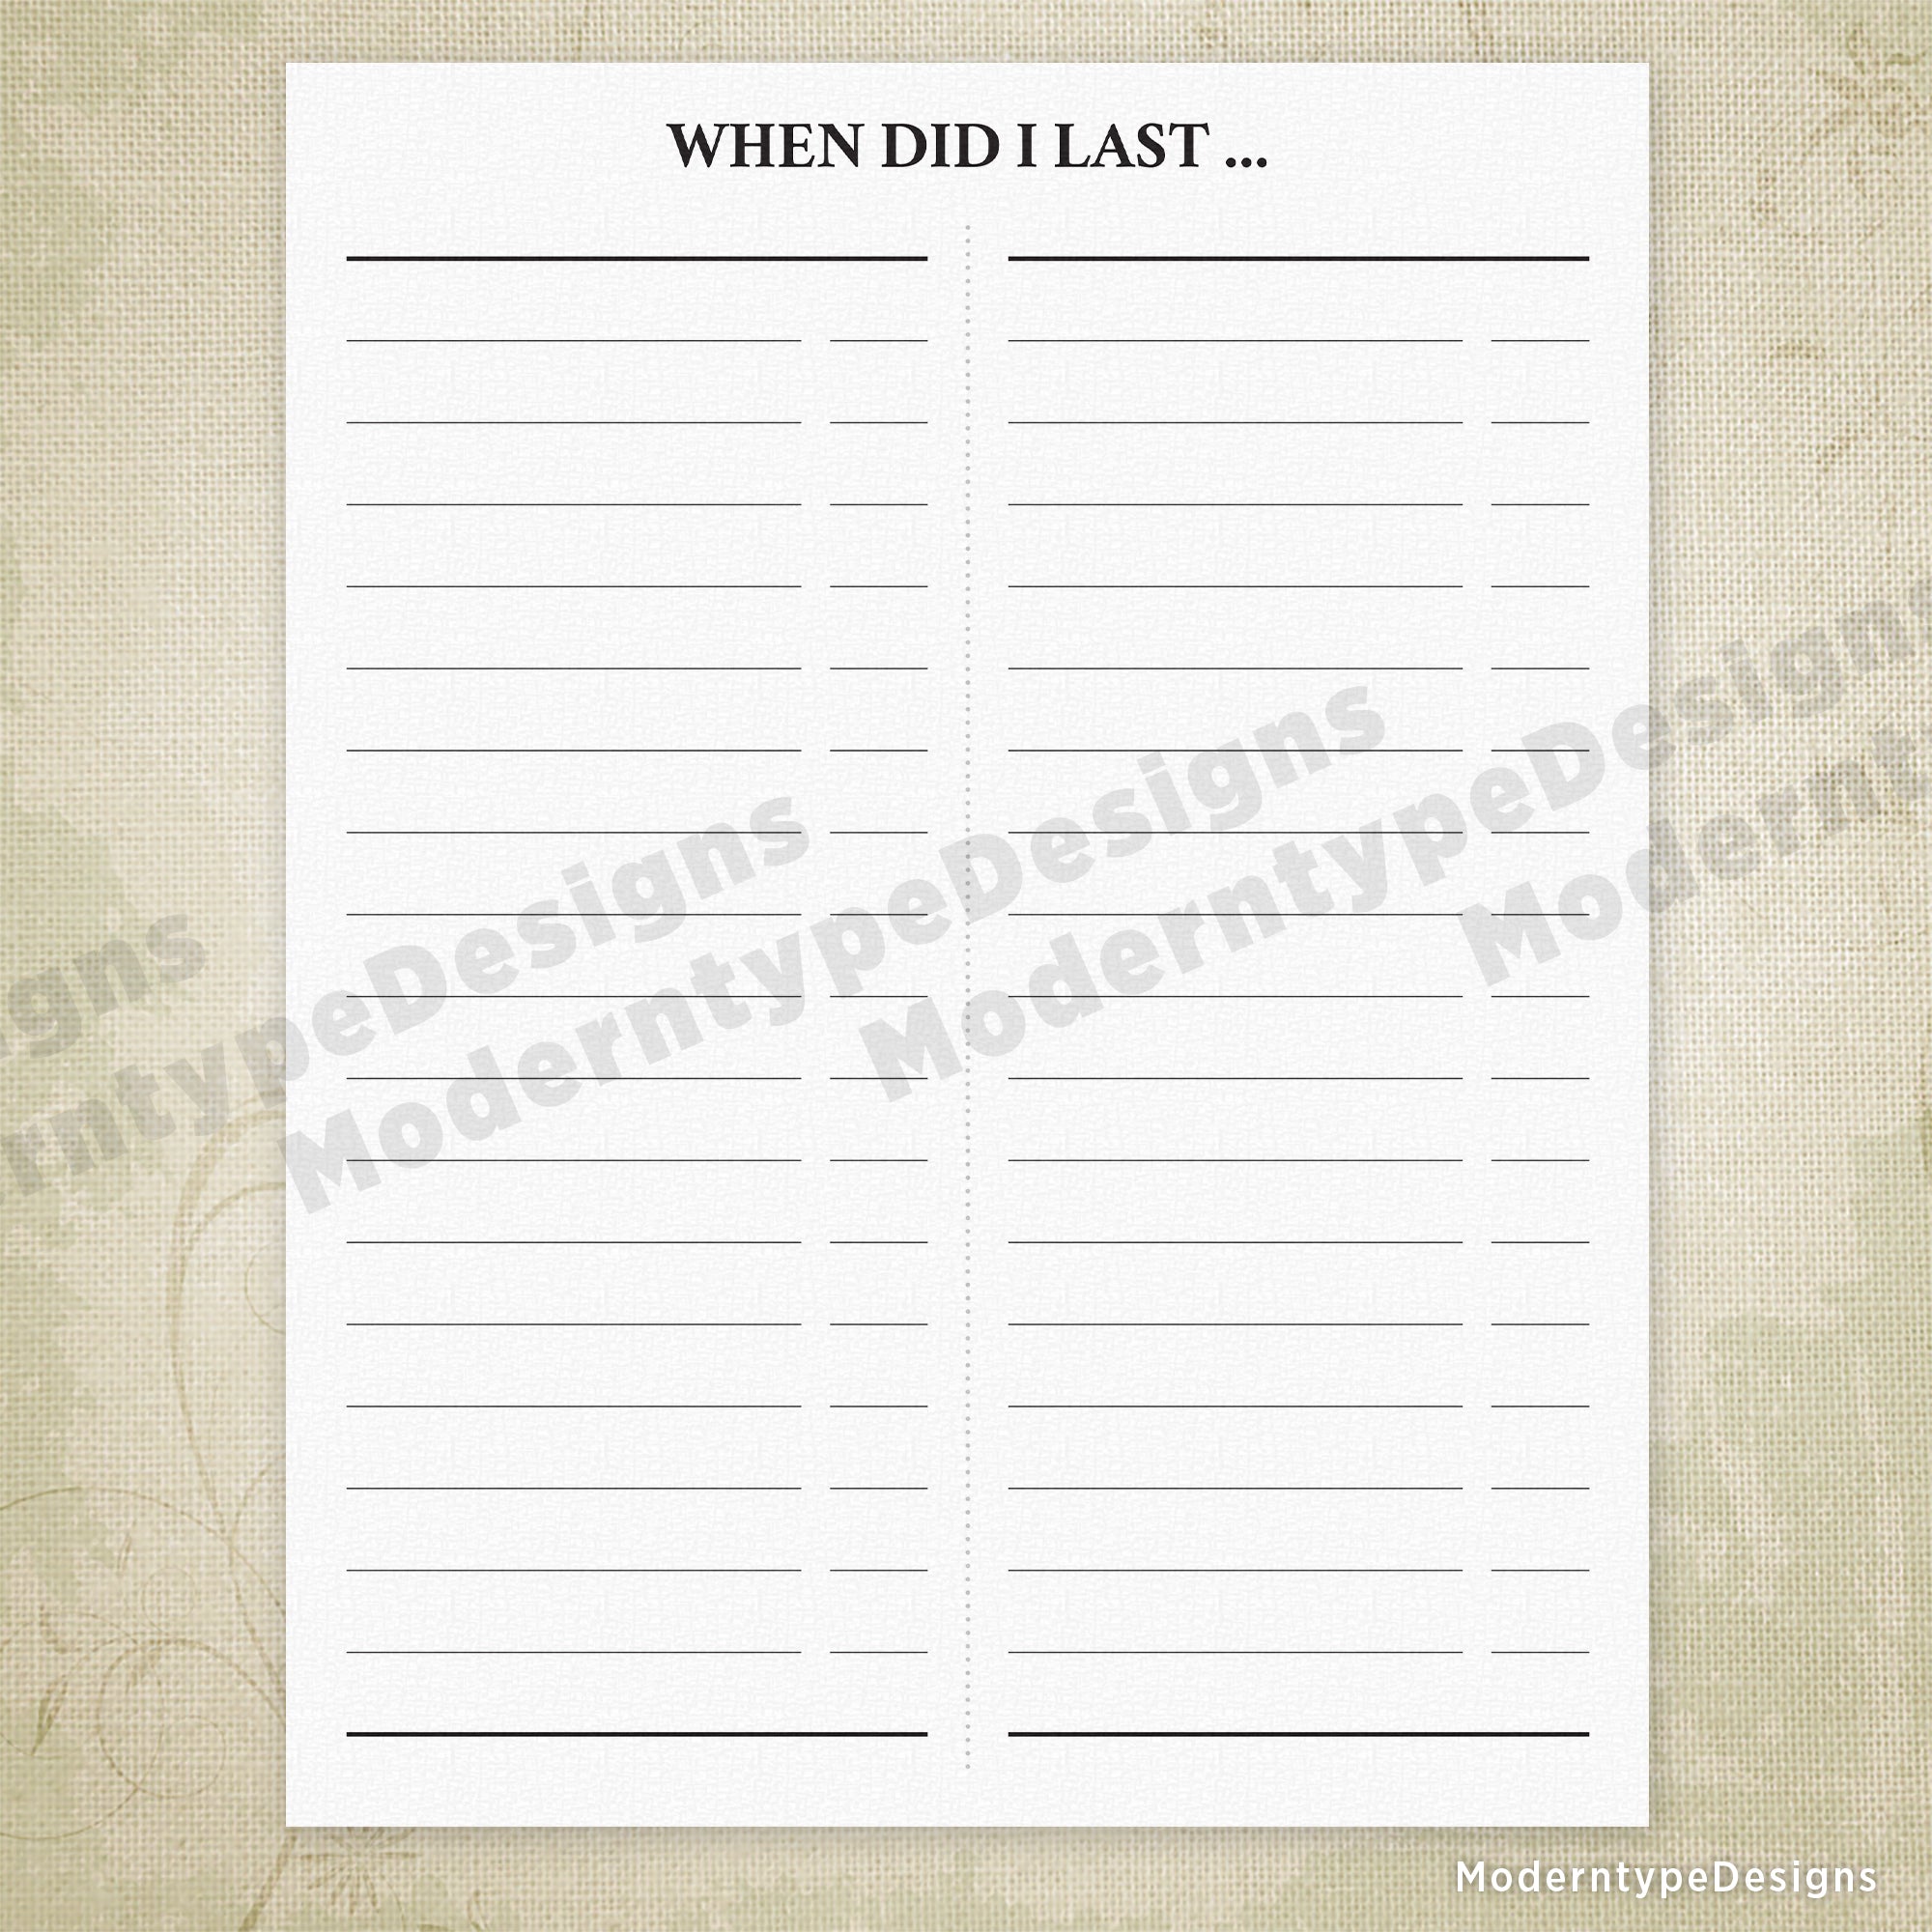 When Did I Last ... Printable Form